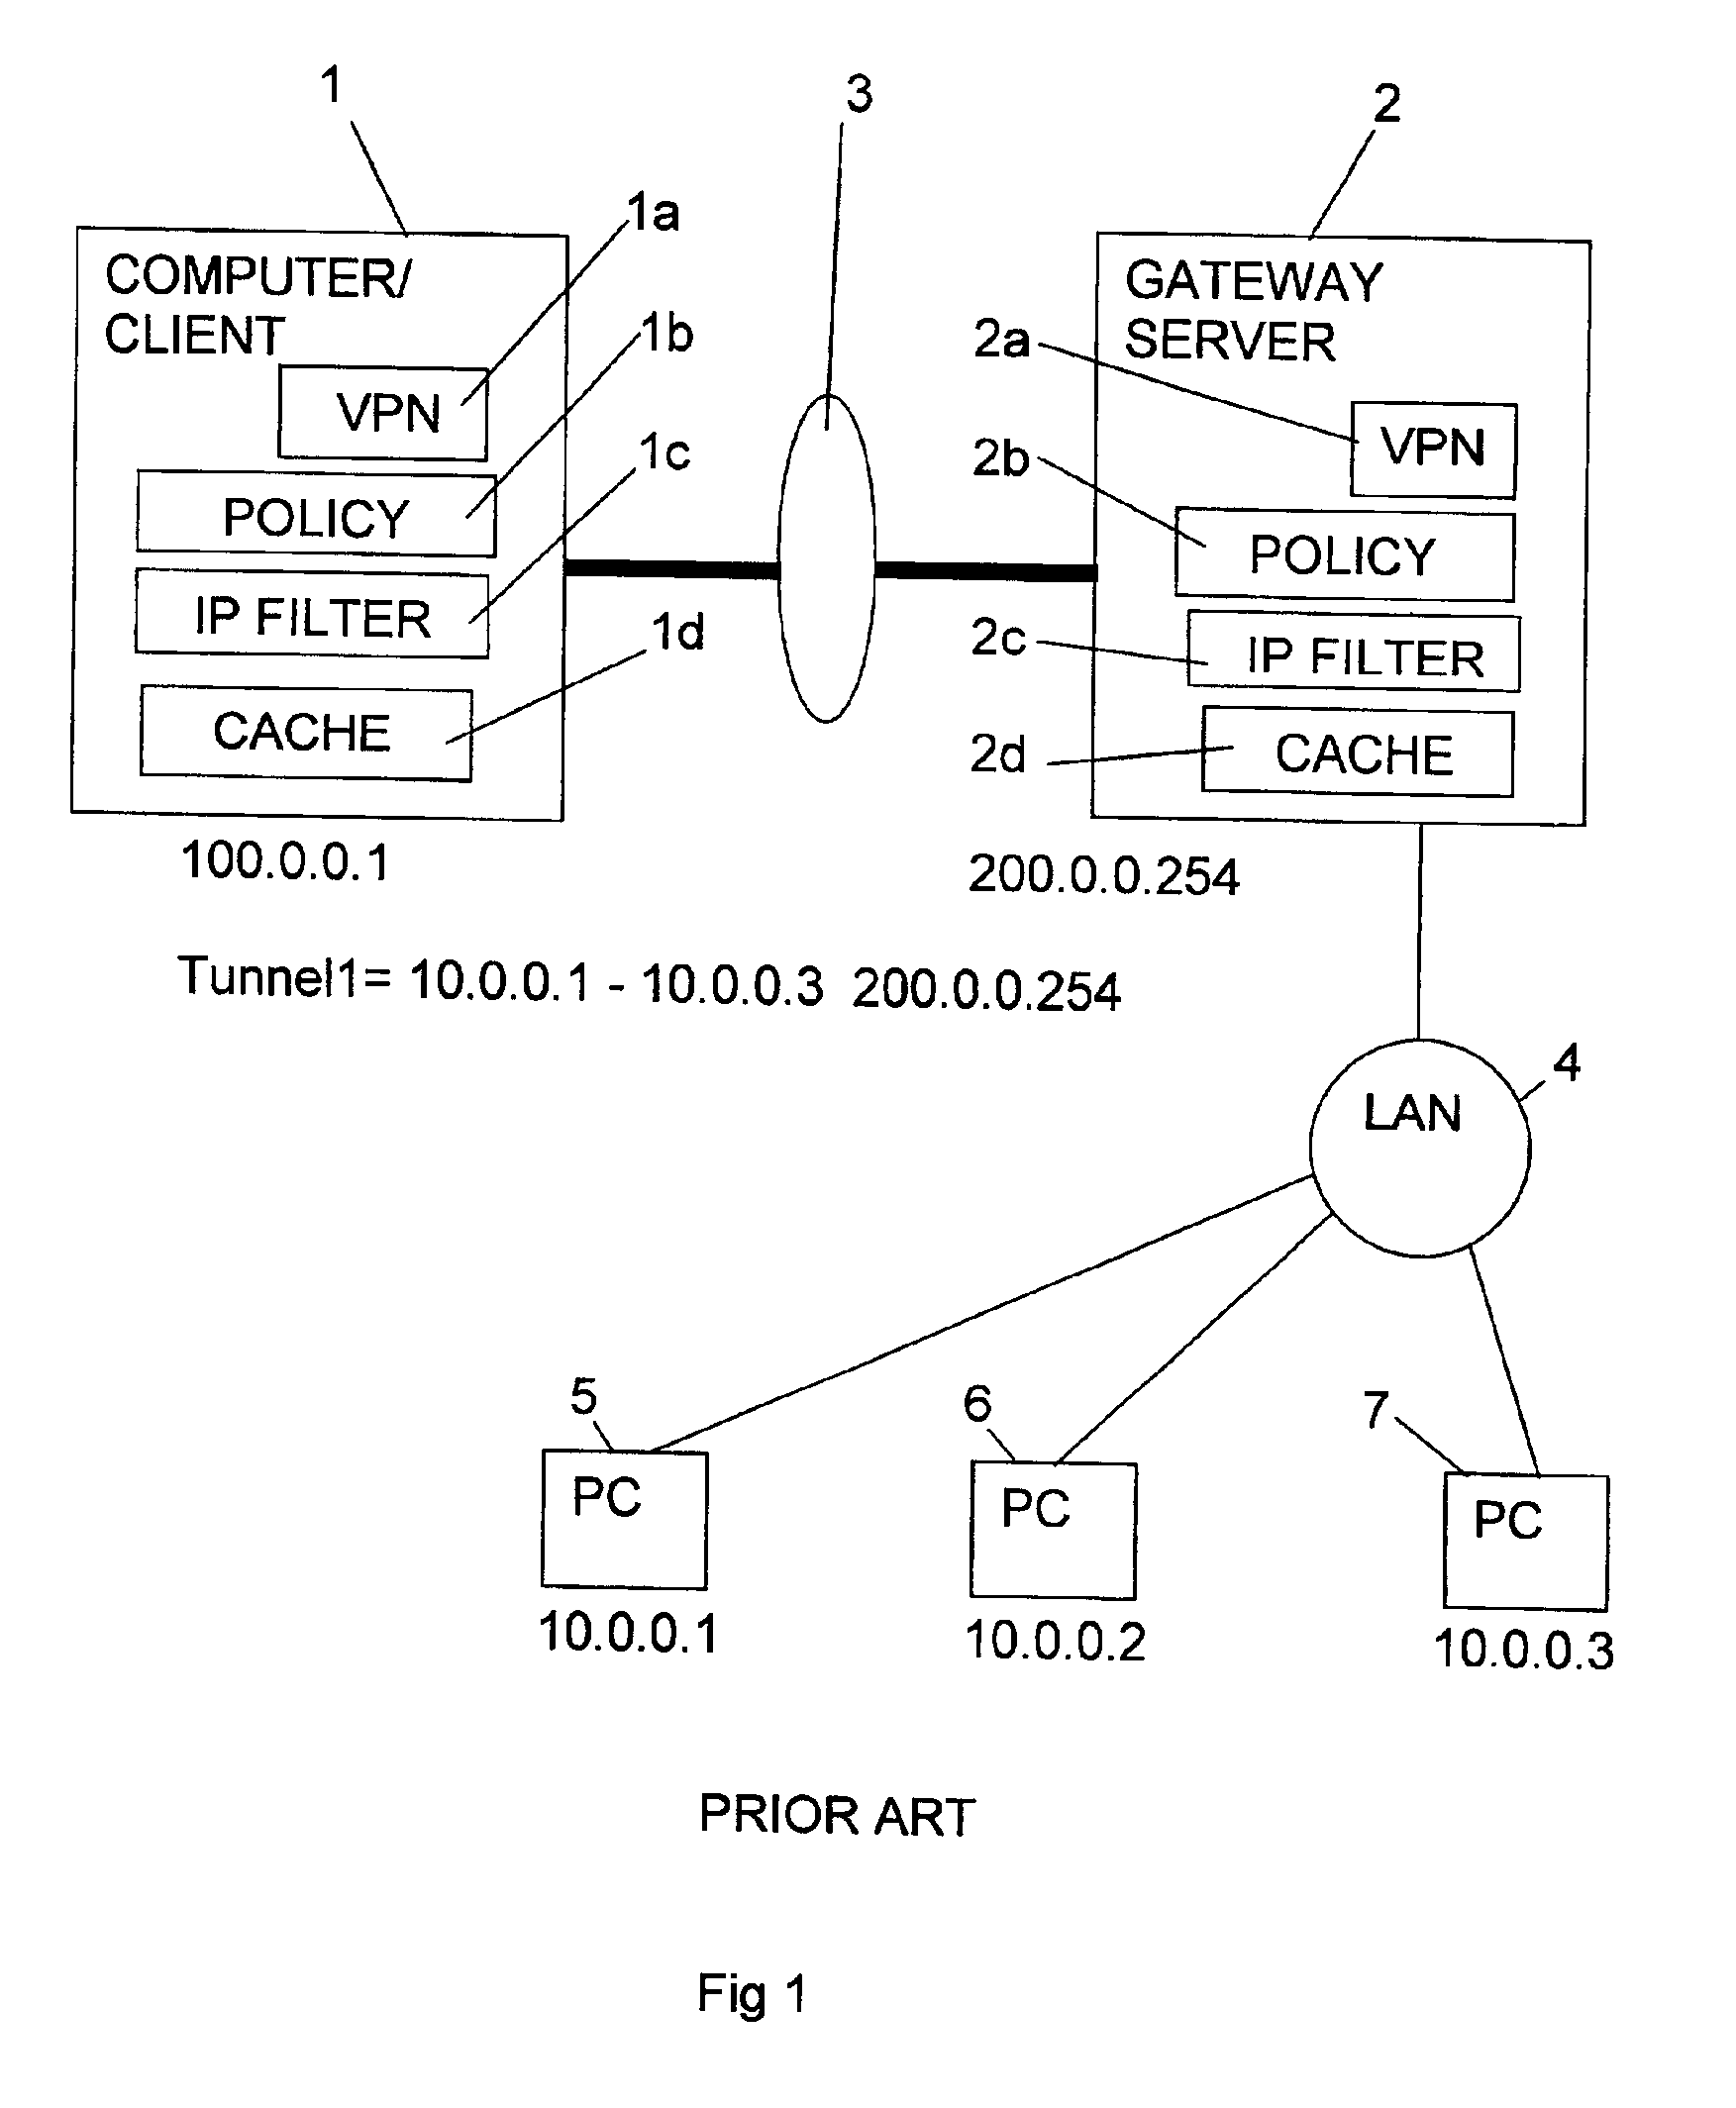 Computer systems, in particular virtual private networks